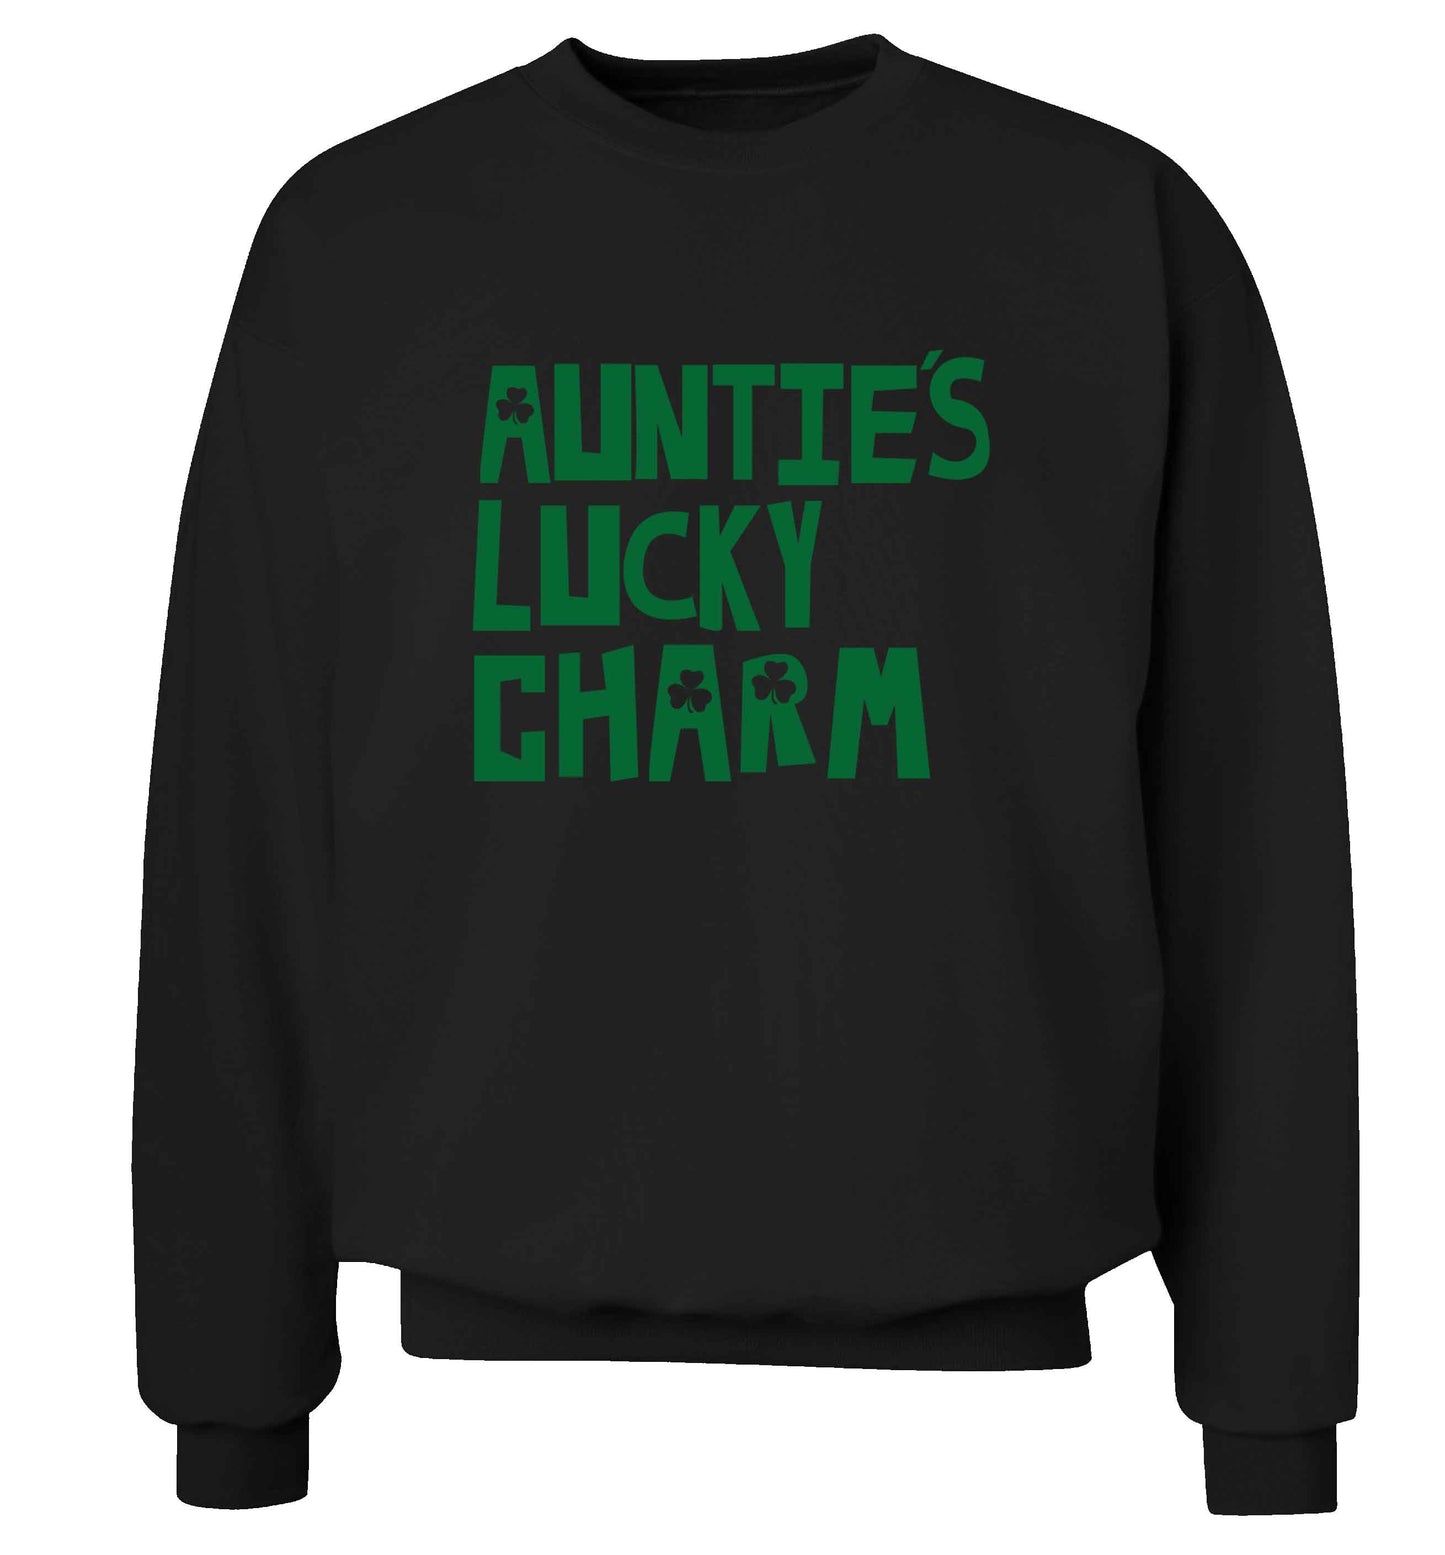 Auntie's lucky charm adult's unisex black sweater 2XL